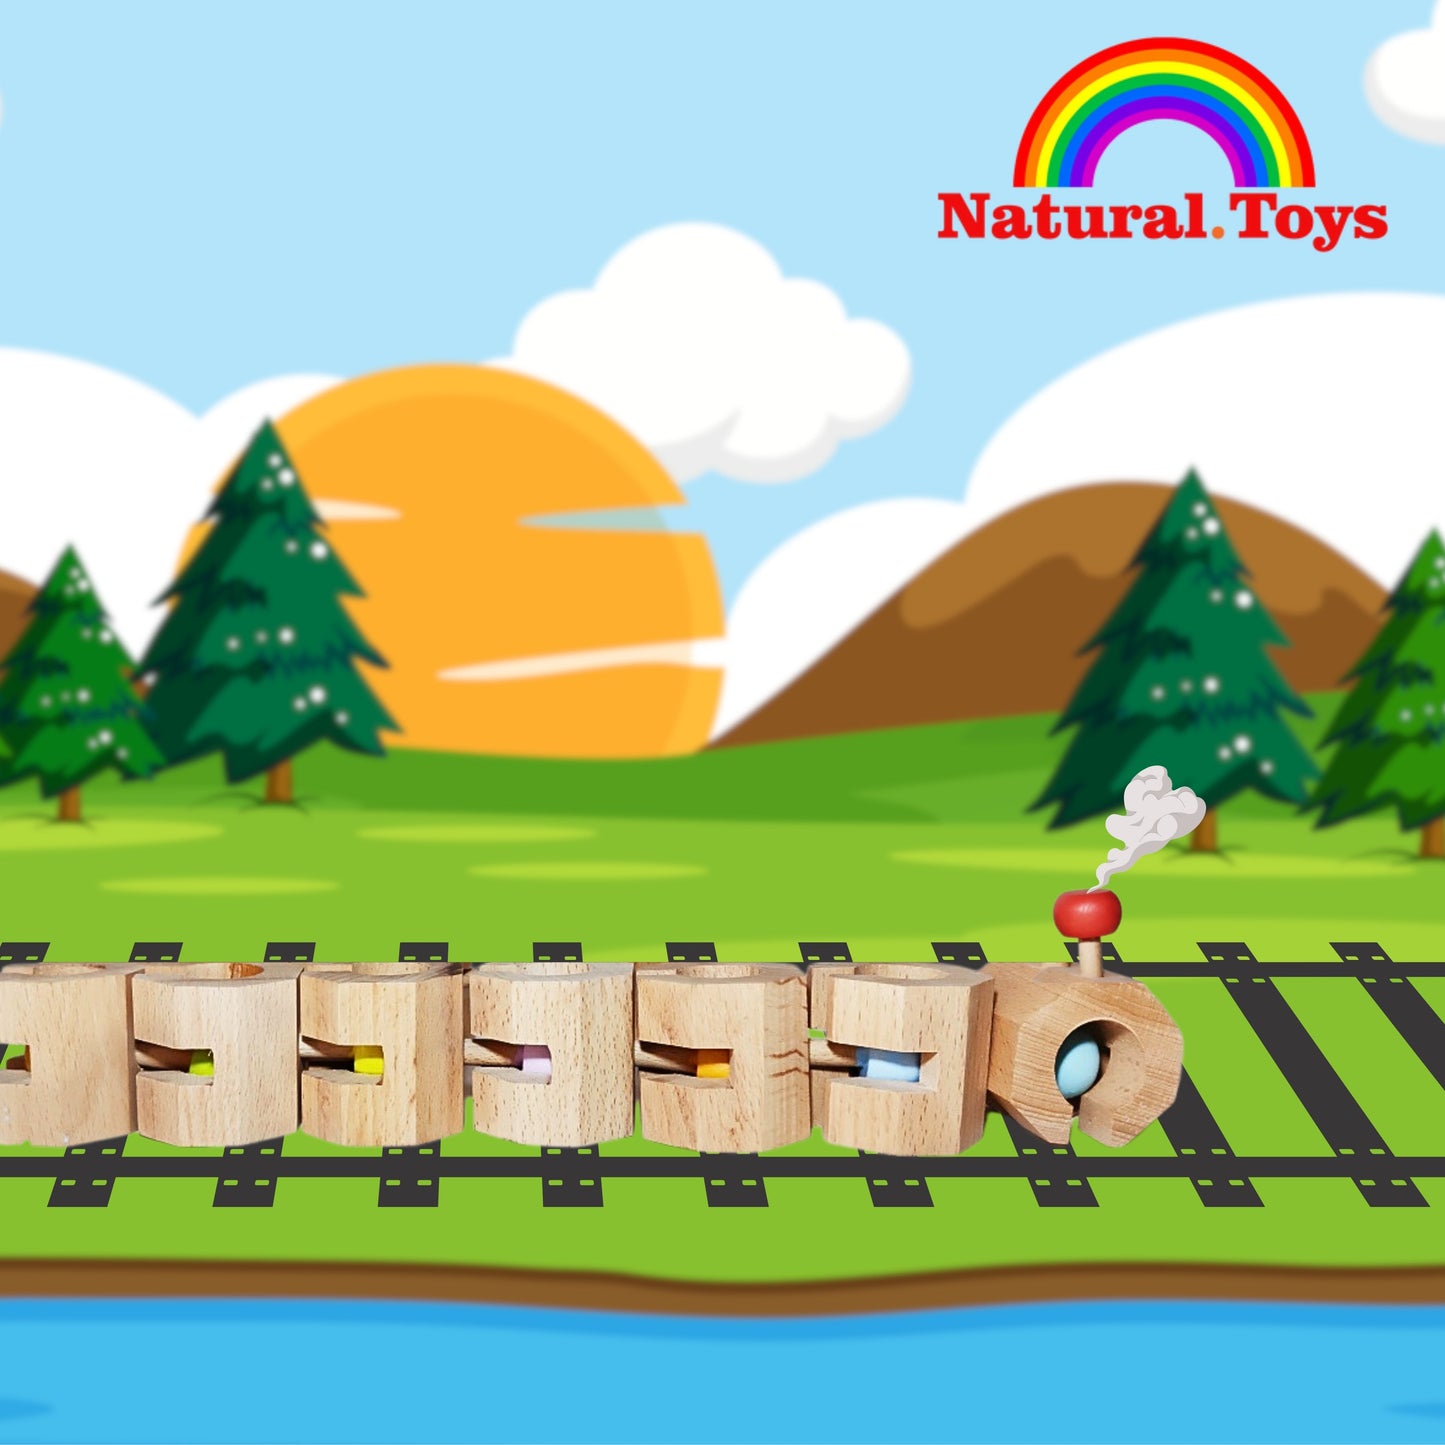 Buy 12 Piece Set of Connectable Chain | Natural Toys